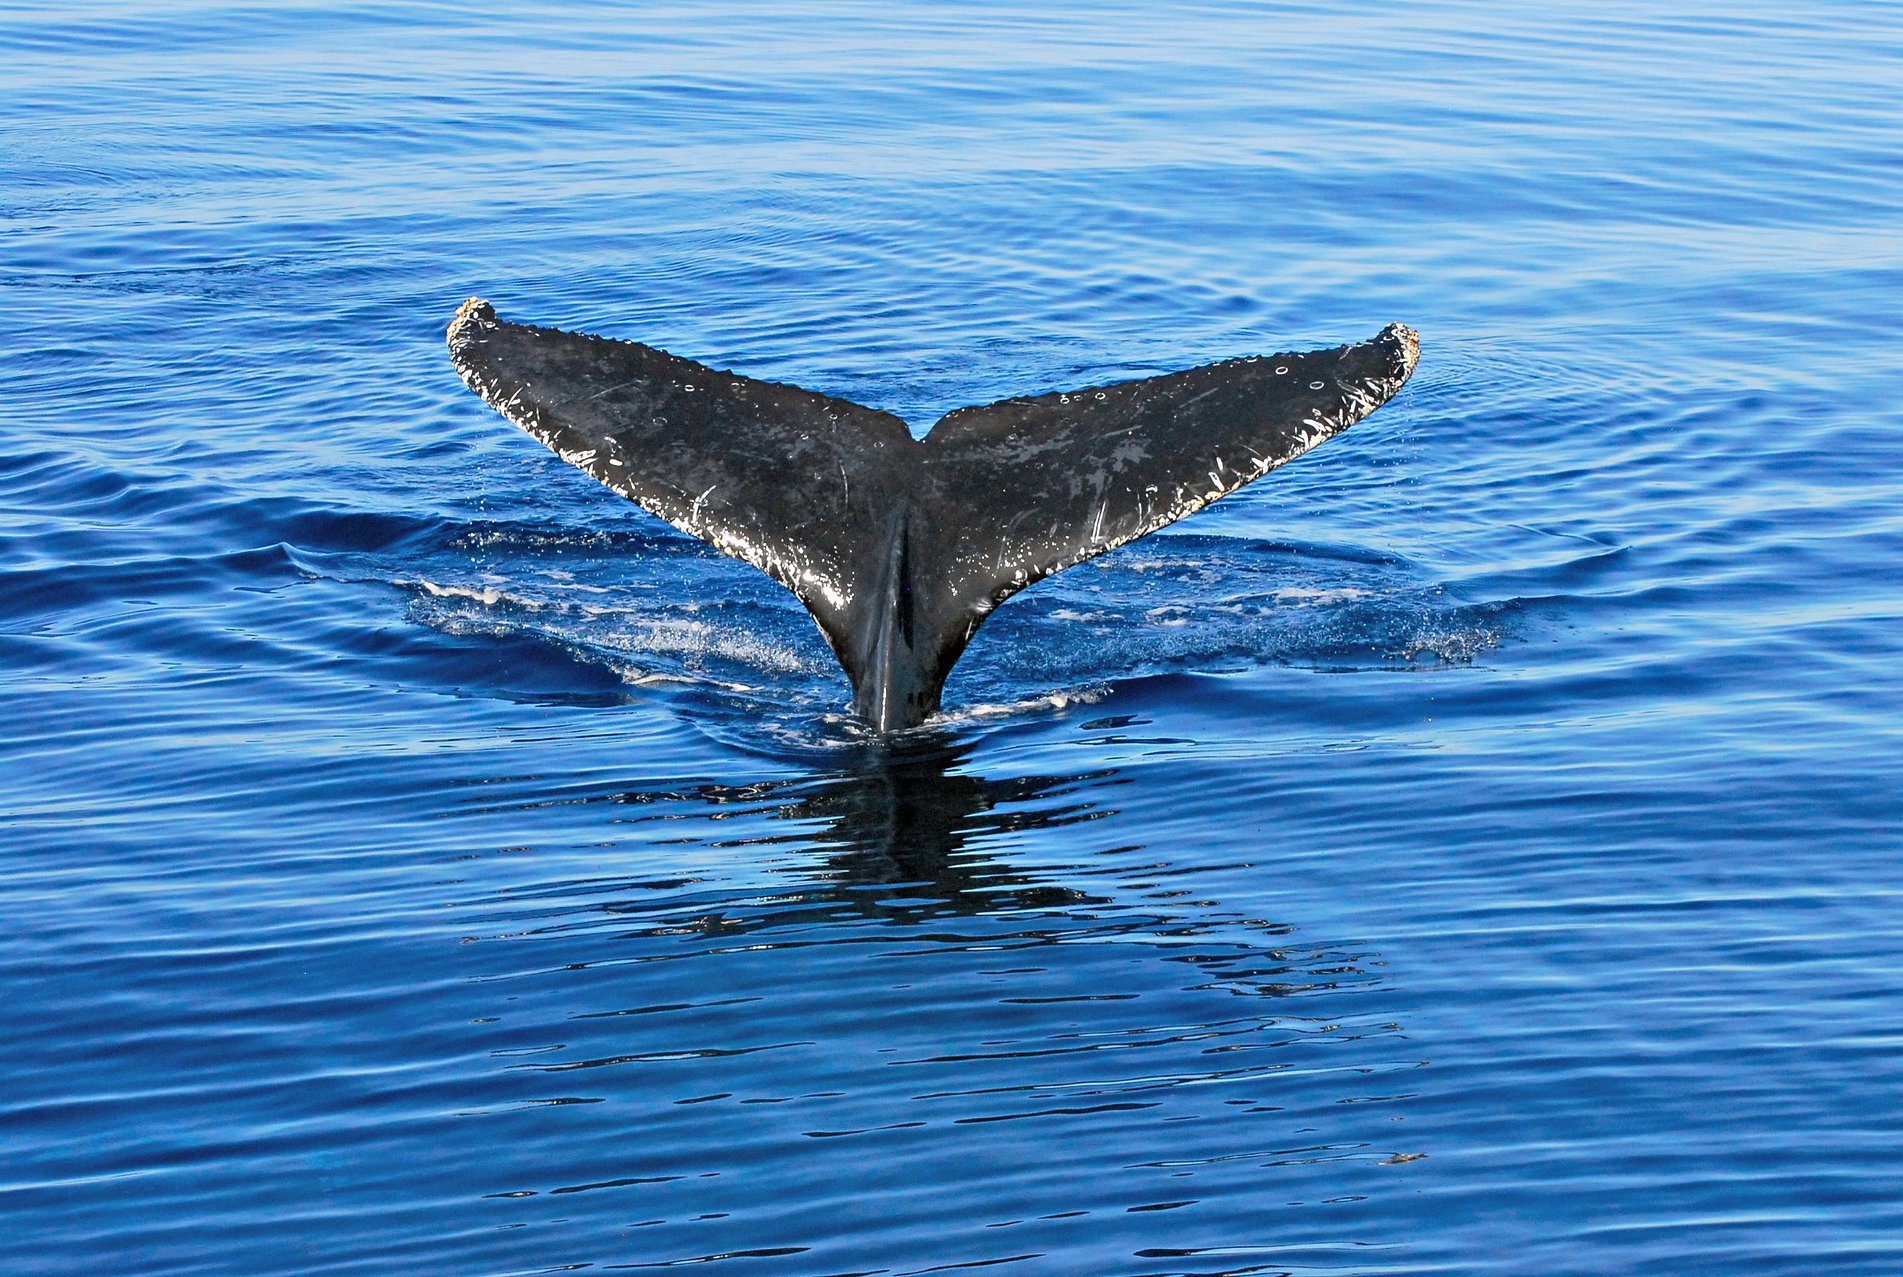 Whale tail as whale dives underwater.